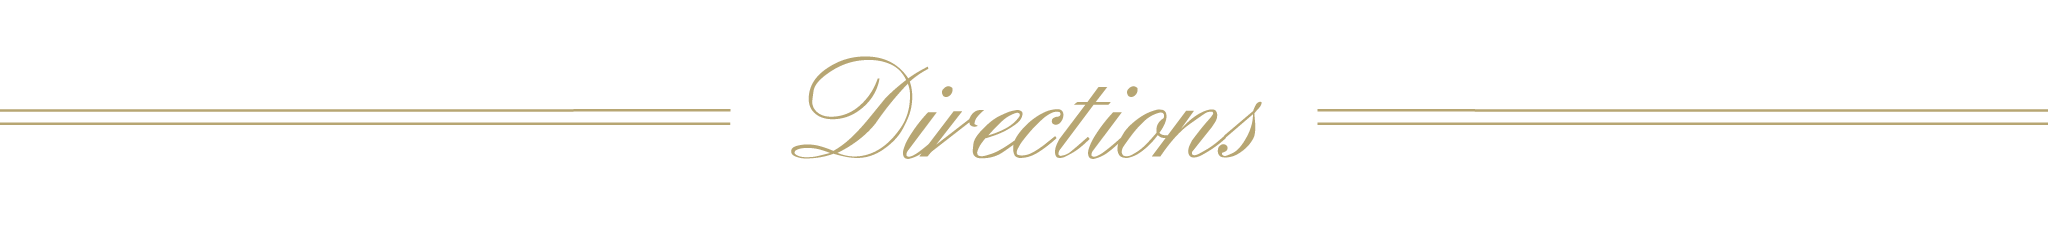 Directions Banner